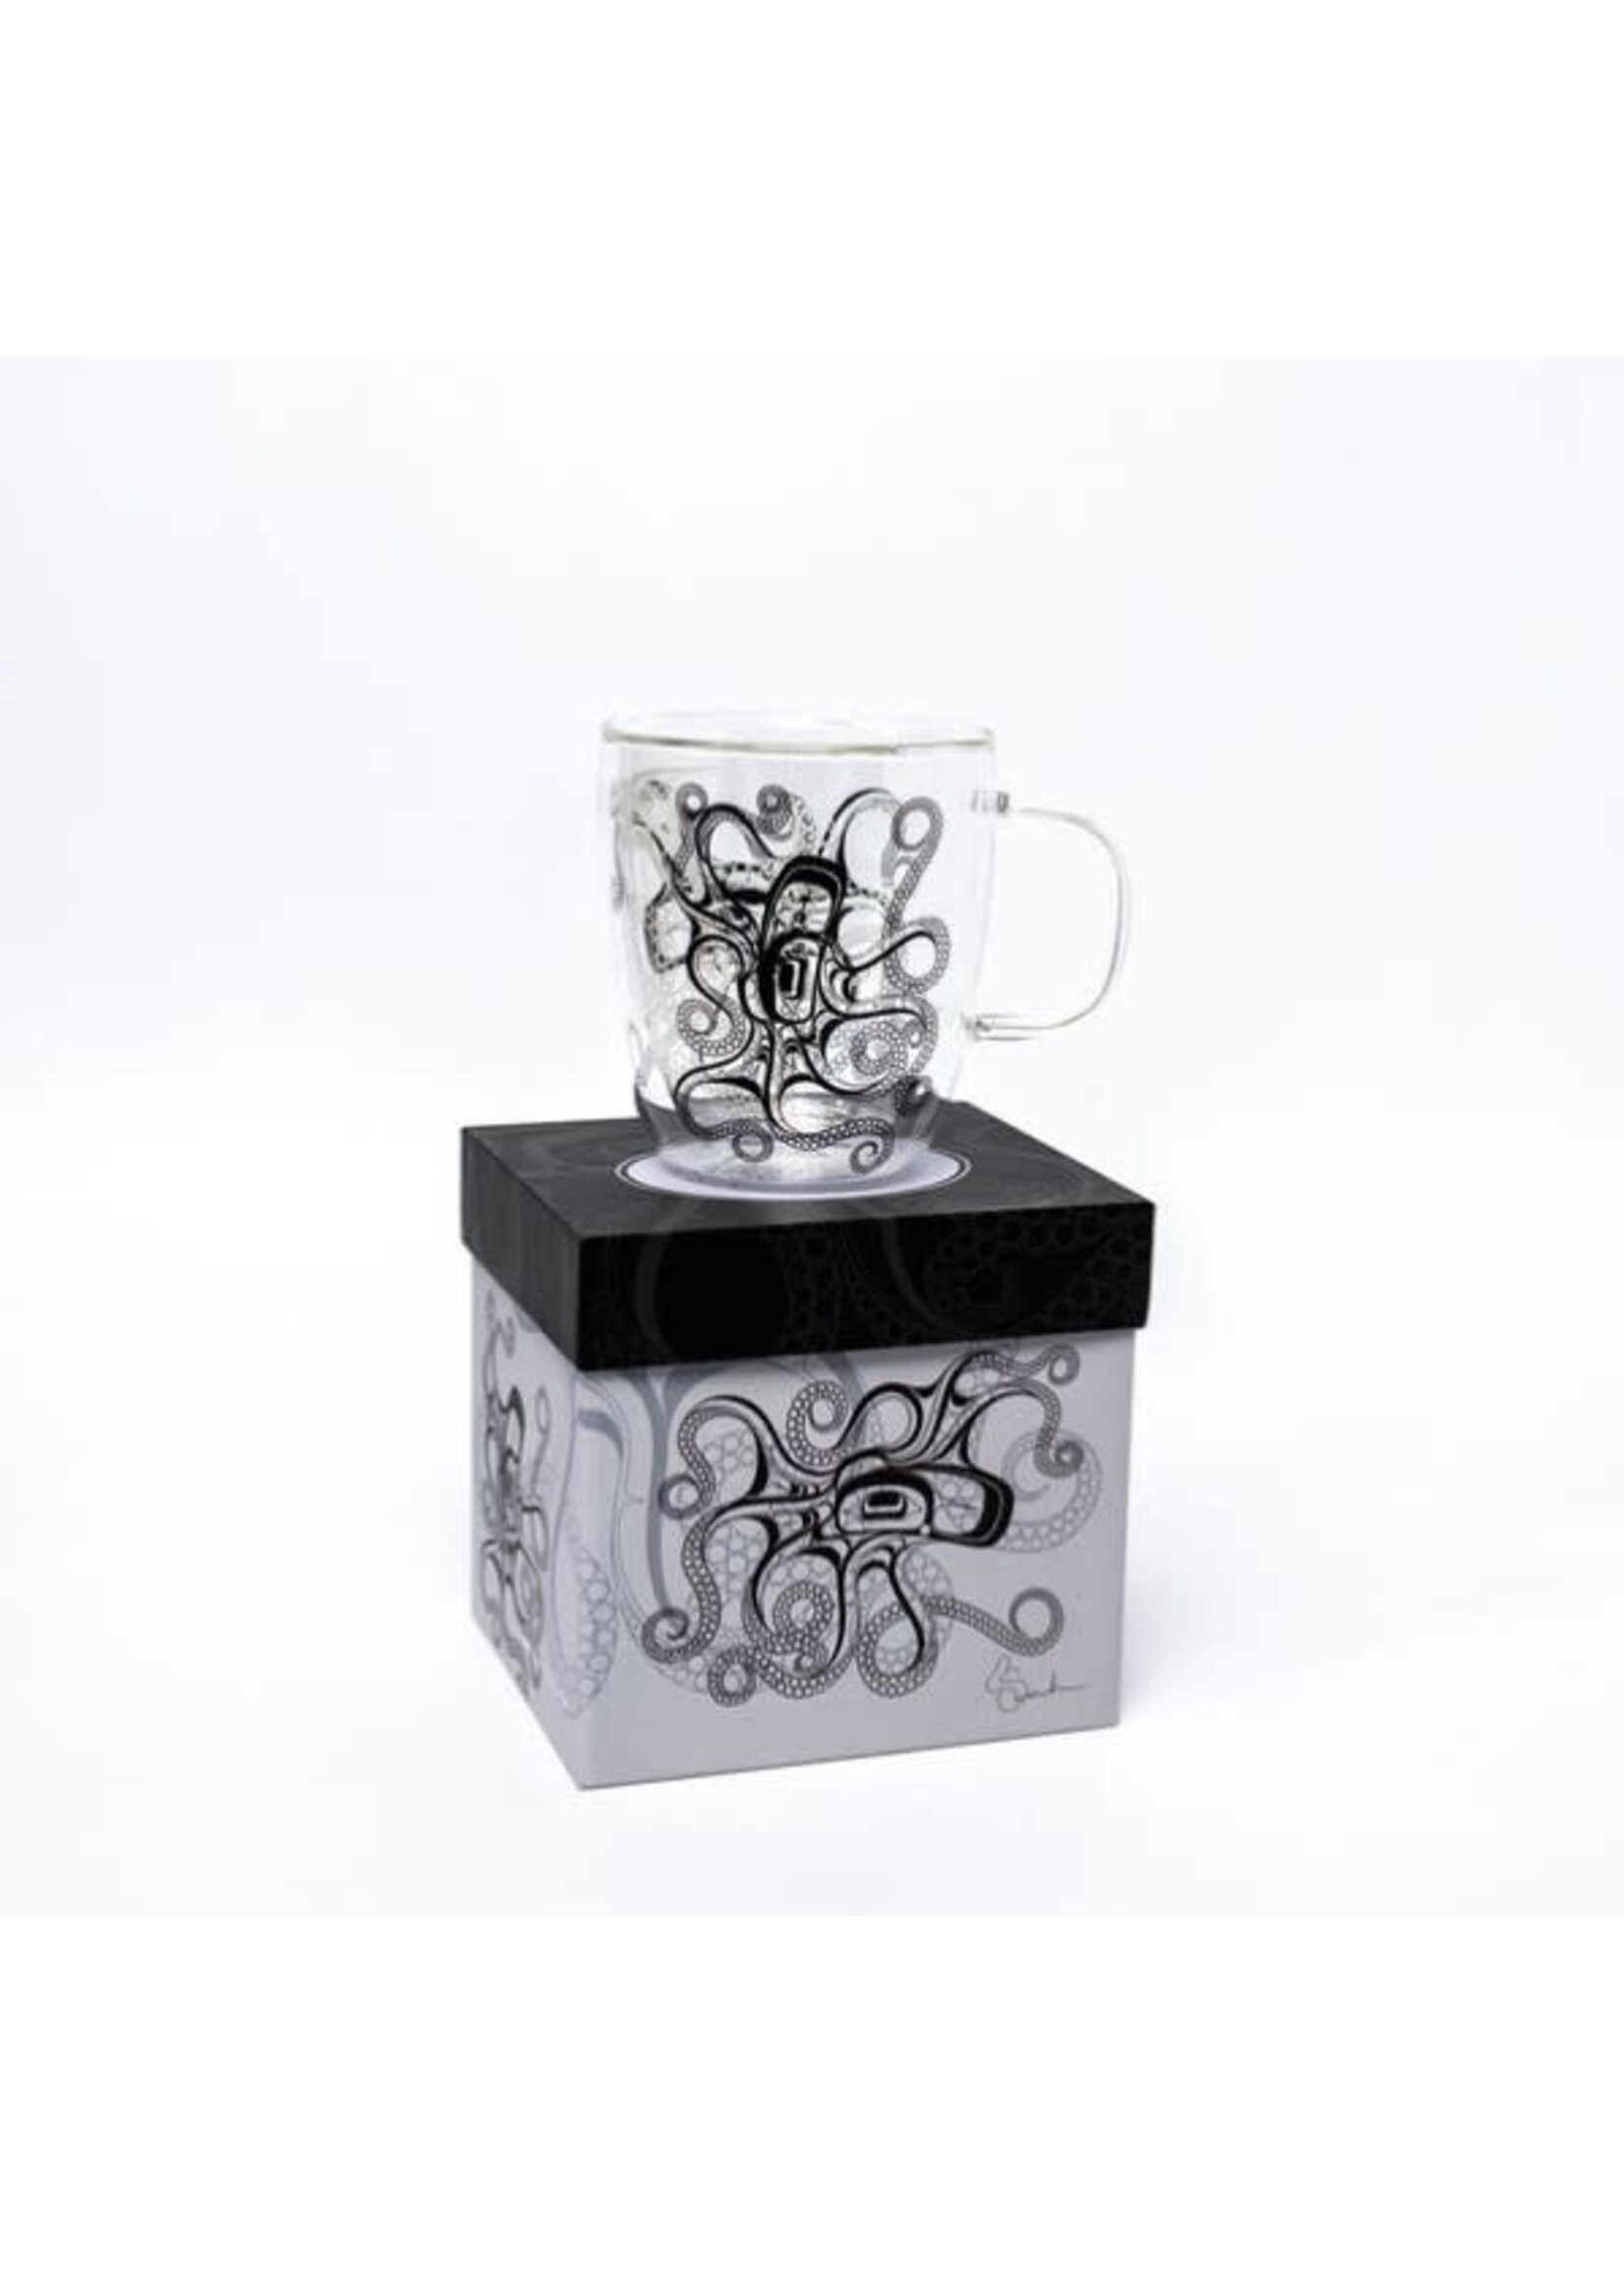 Native Northwest Double Walled Glass Mug -Octopus by Ernest Swanson